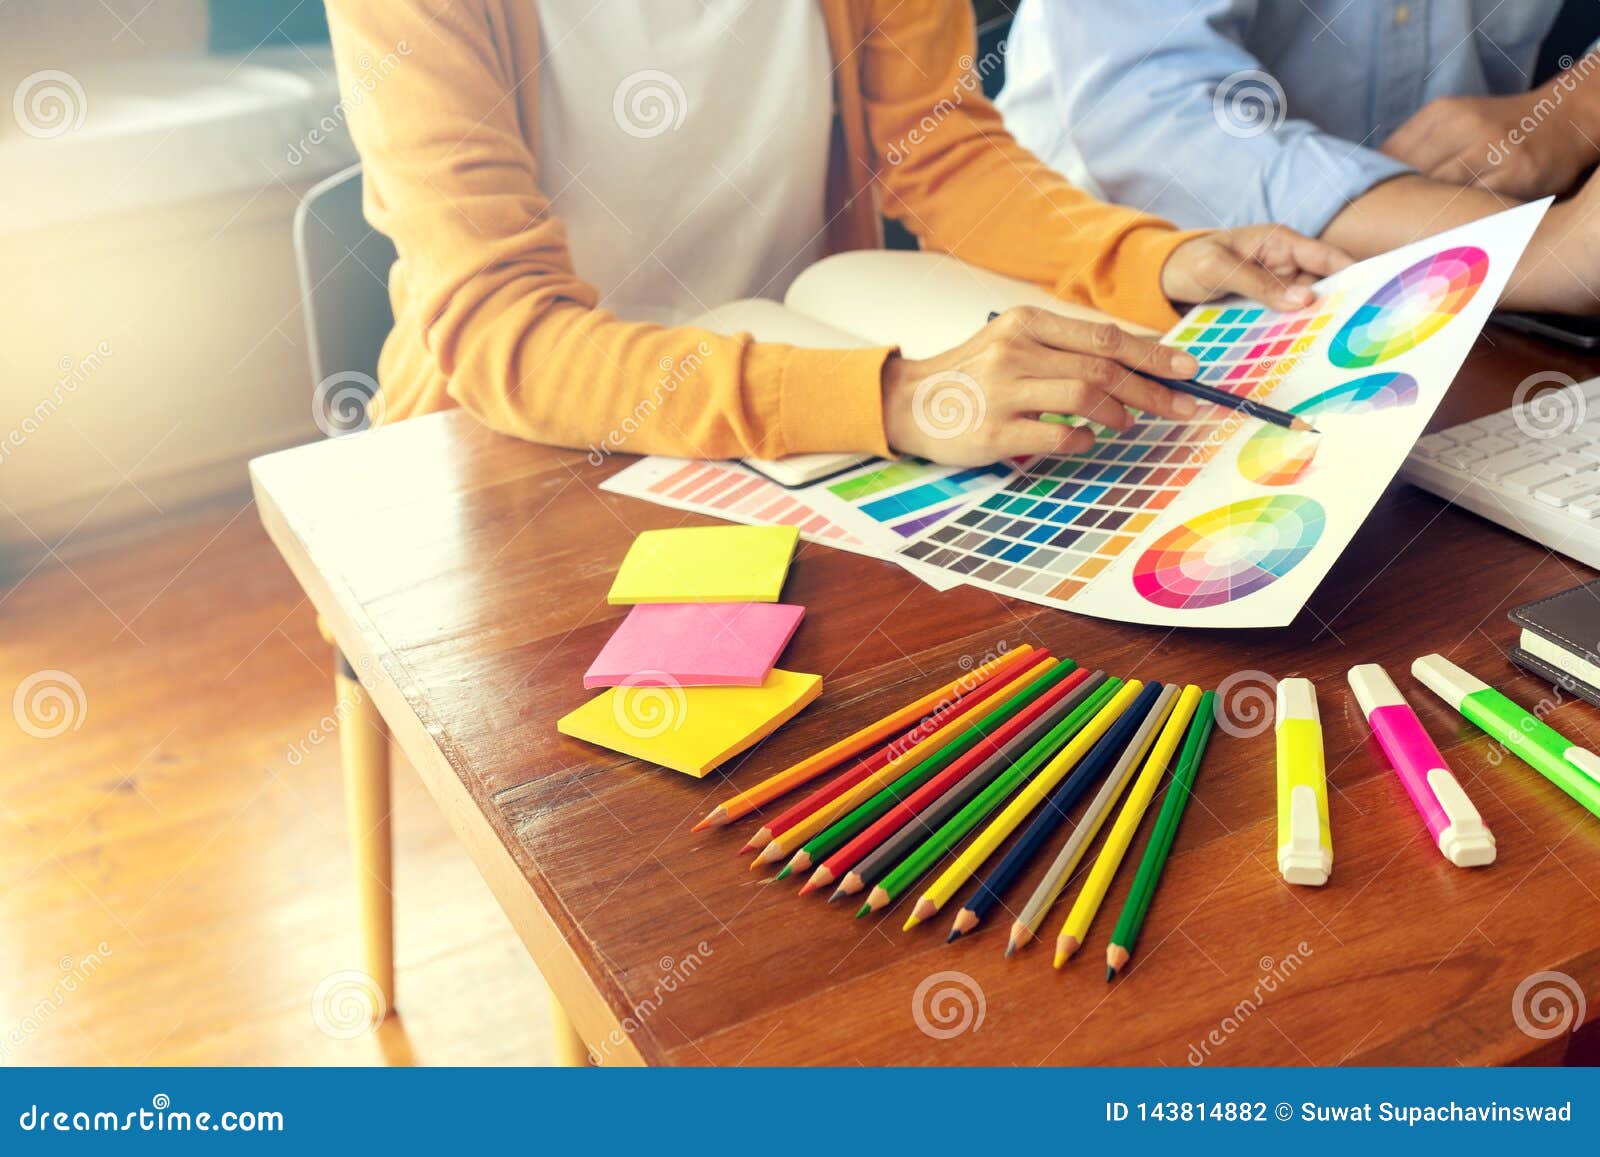 Team Work For Graphic Design Working On Wood Table Stock Photo - Image